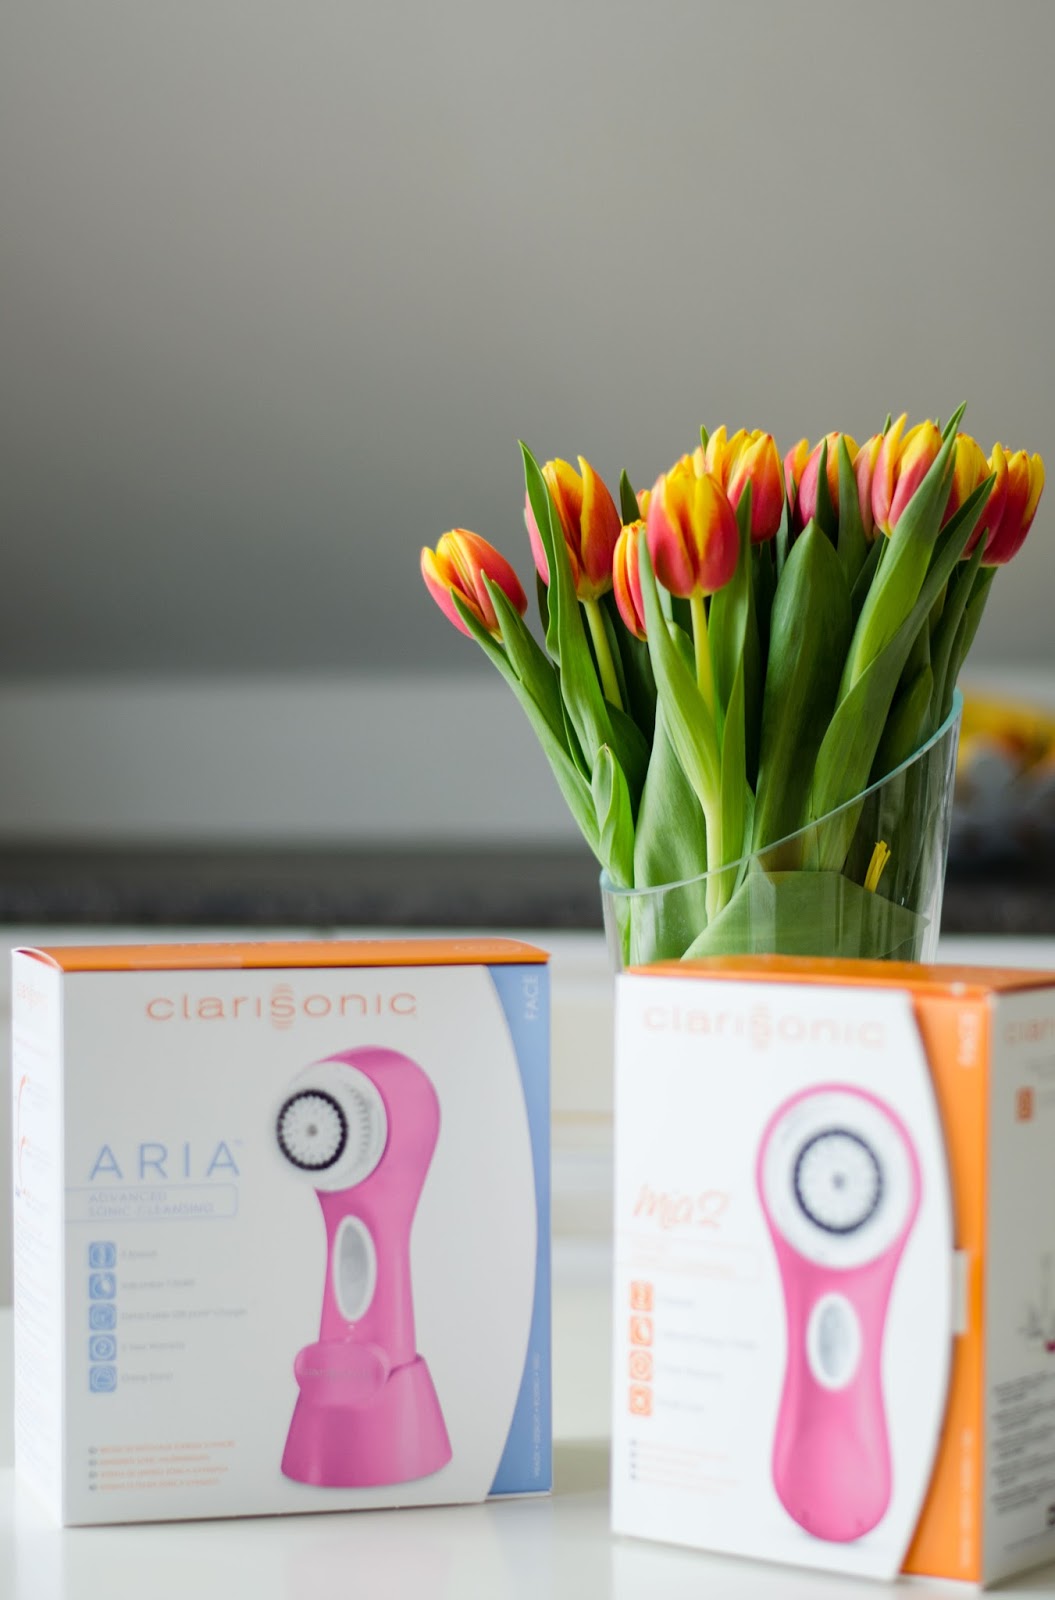 clarisonic mia2 area face brush giveaway